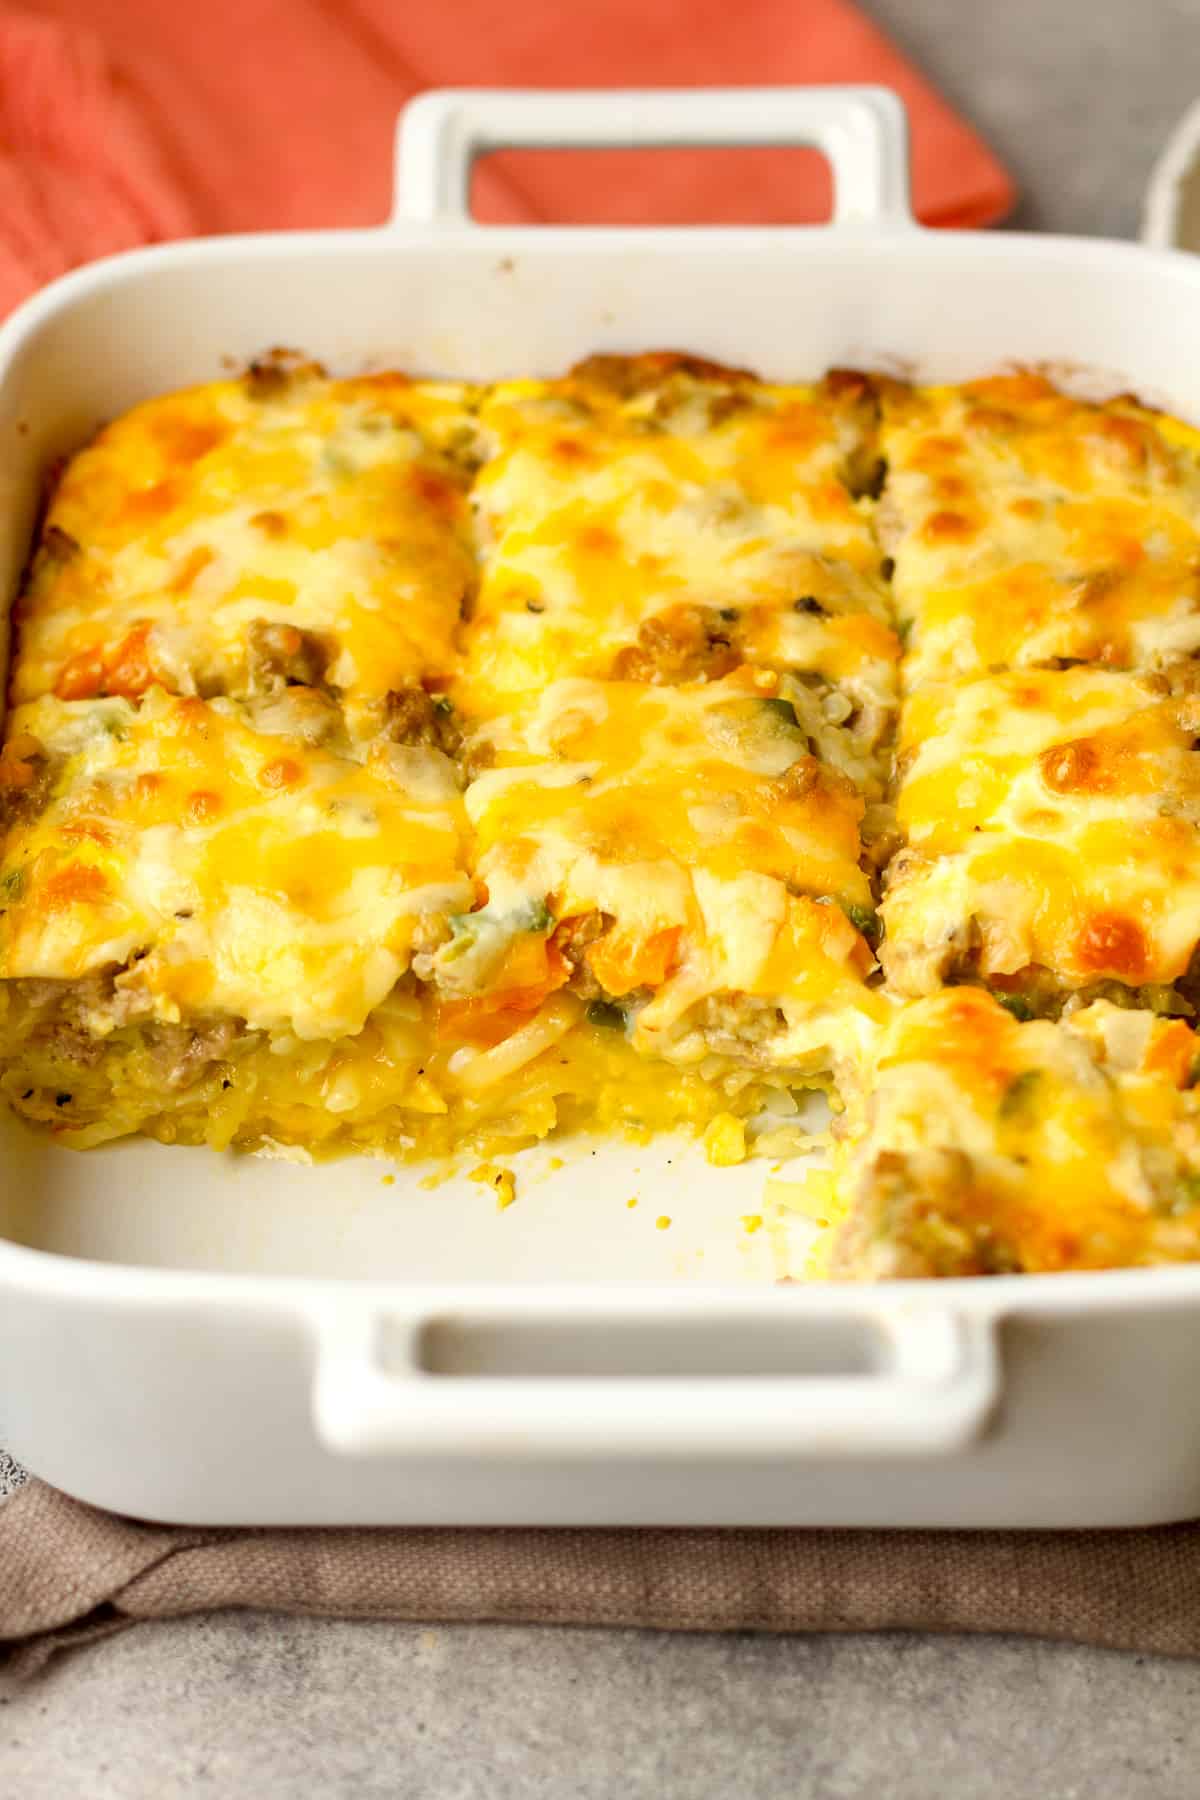 Side view of several pieces of egg casserole.